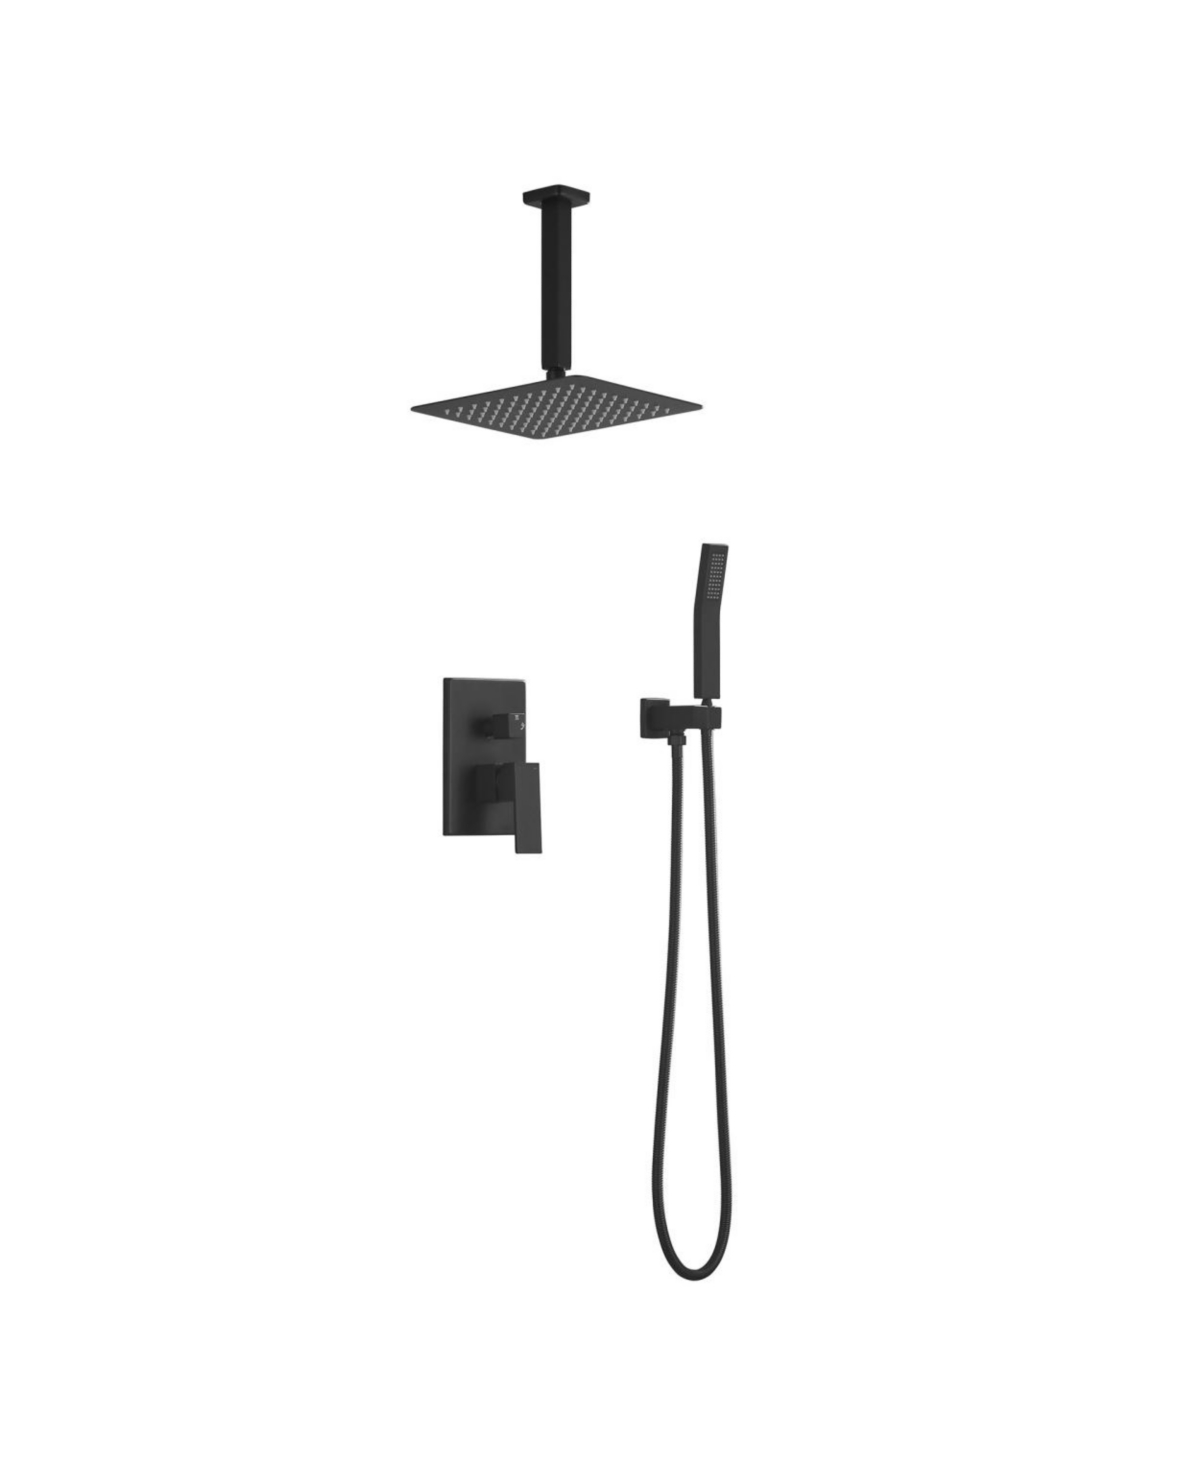 Ceiling Mounted Shower System Combo Set With Handheld And 12" Shower Head - Black